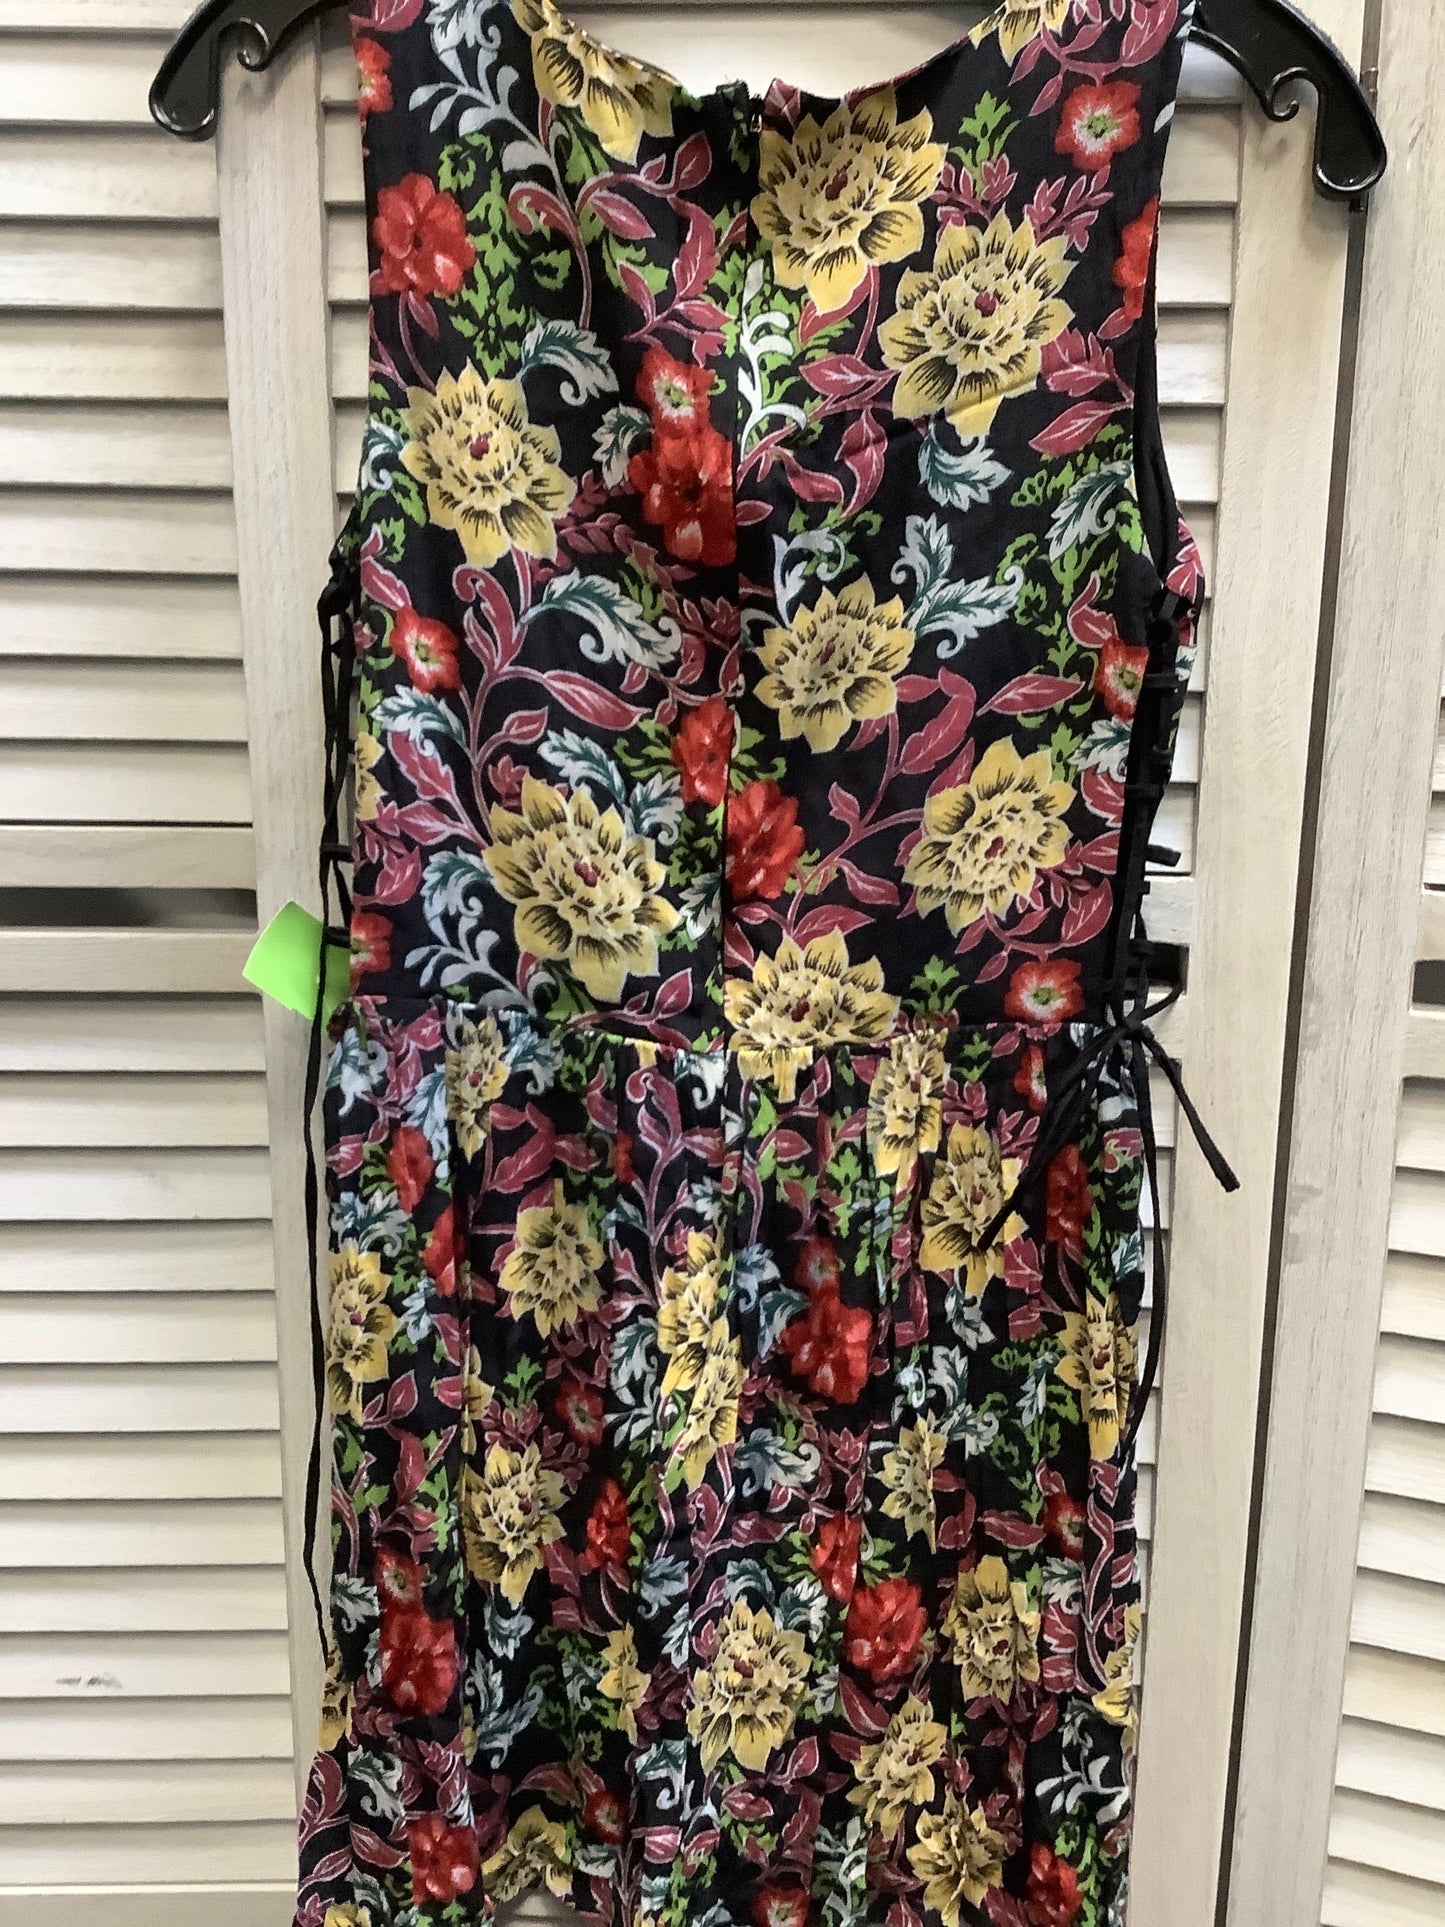 Floral Print Dress Casual Short Forever 21, Size S